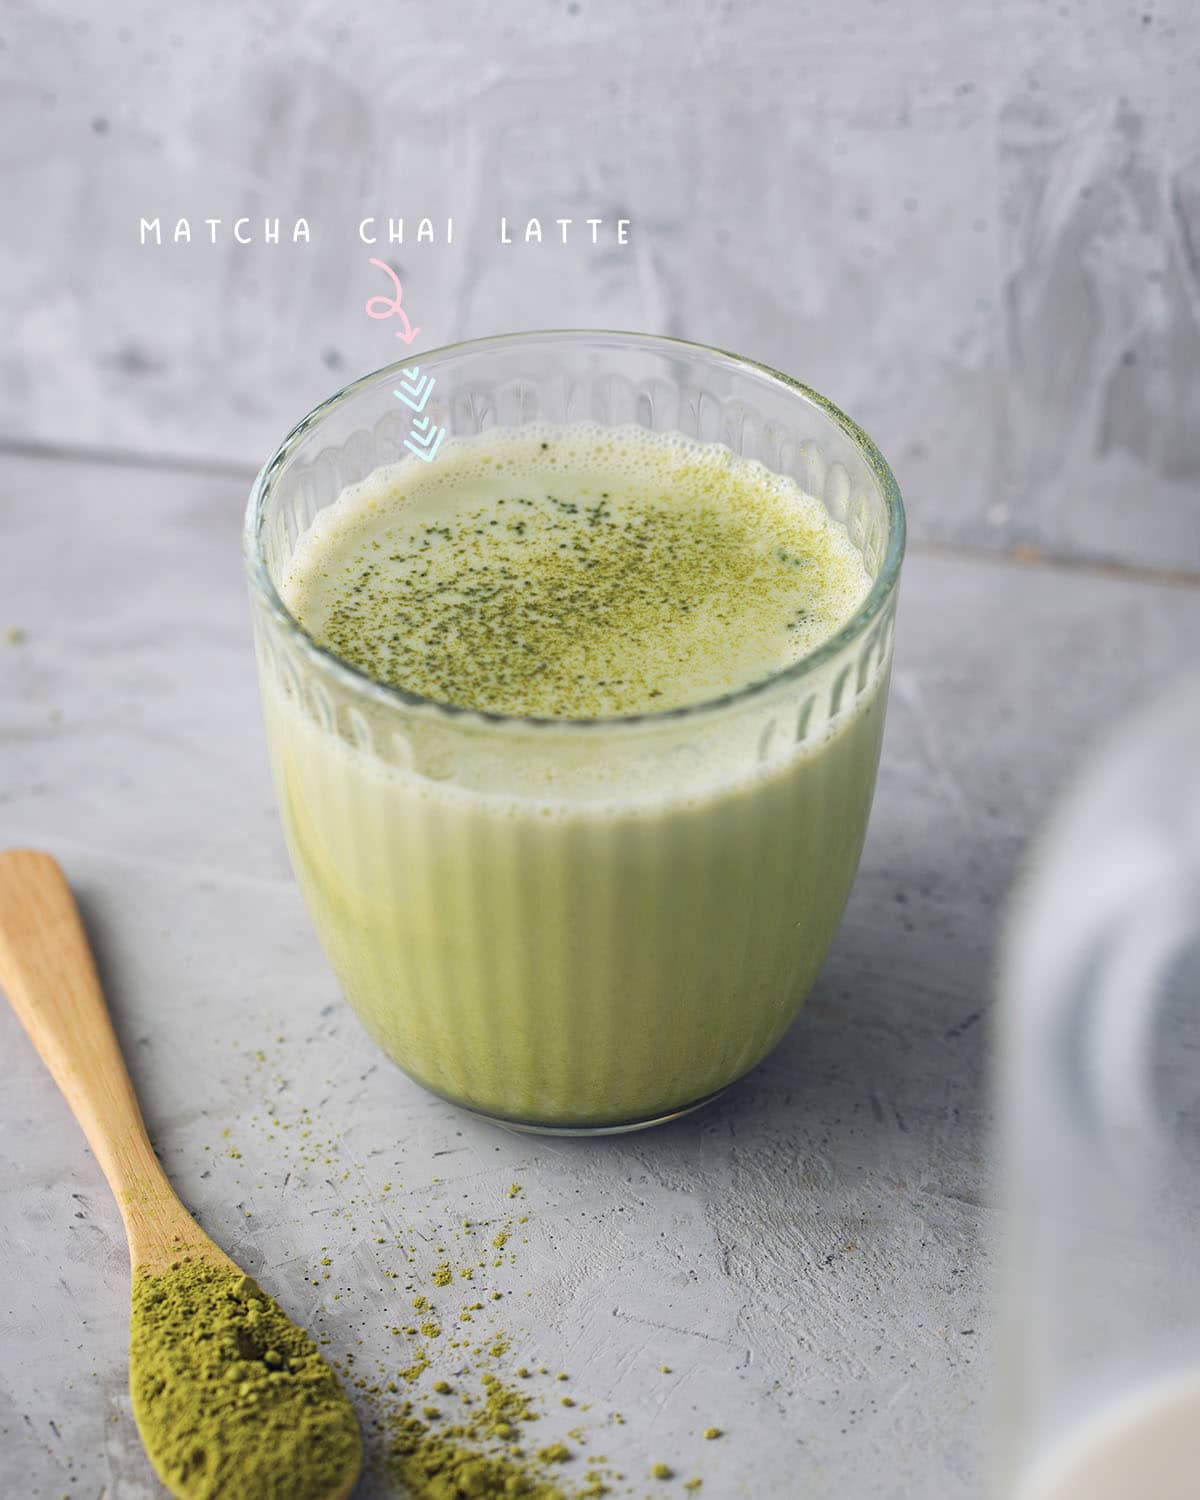 This matcha chai latte is the perfect balance of cozy and refreshing, and I guarantee that it will become your new favorite wintertime drink! I particularly love this recipe because it uses almond milk instead of dairy, making it lighter and easier to digest.